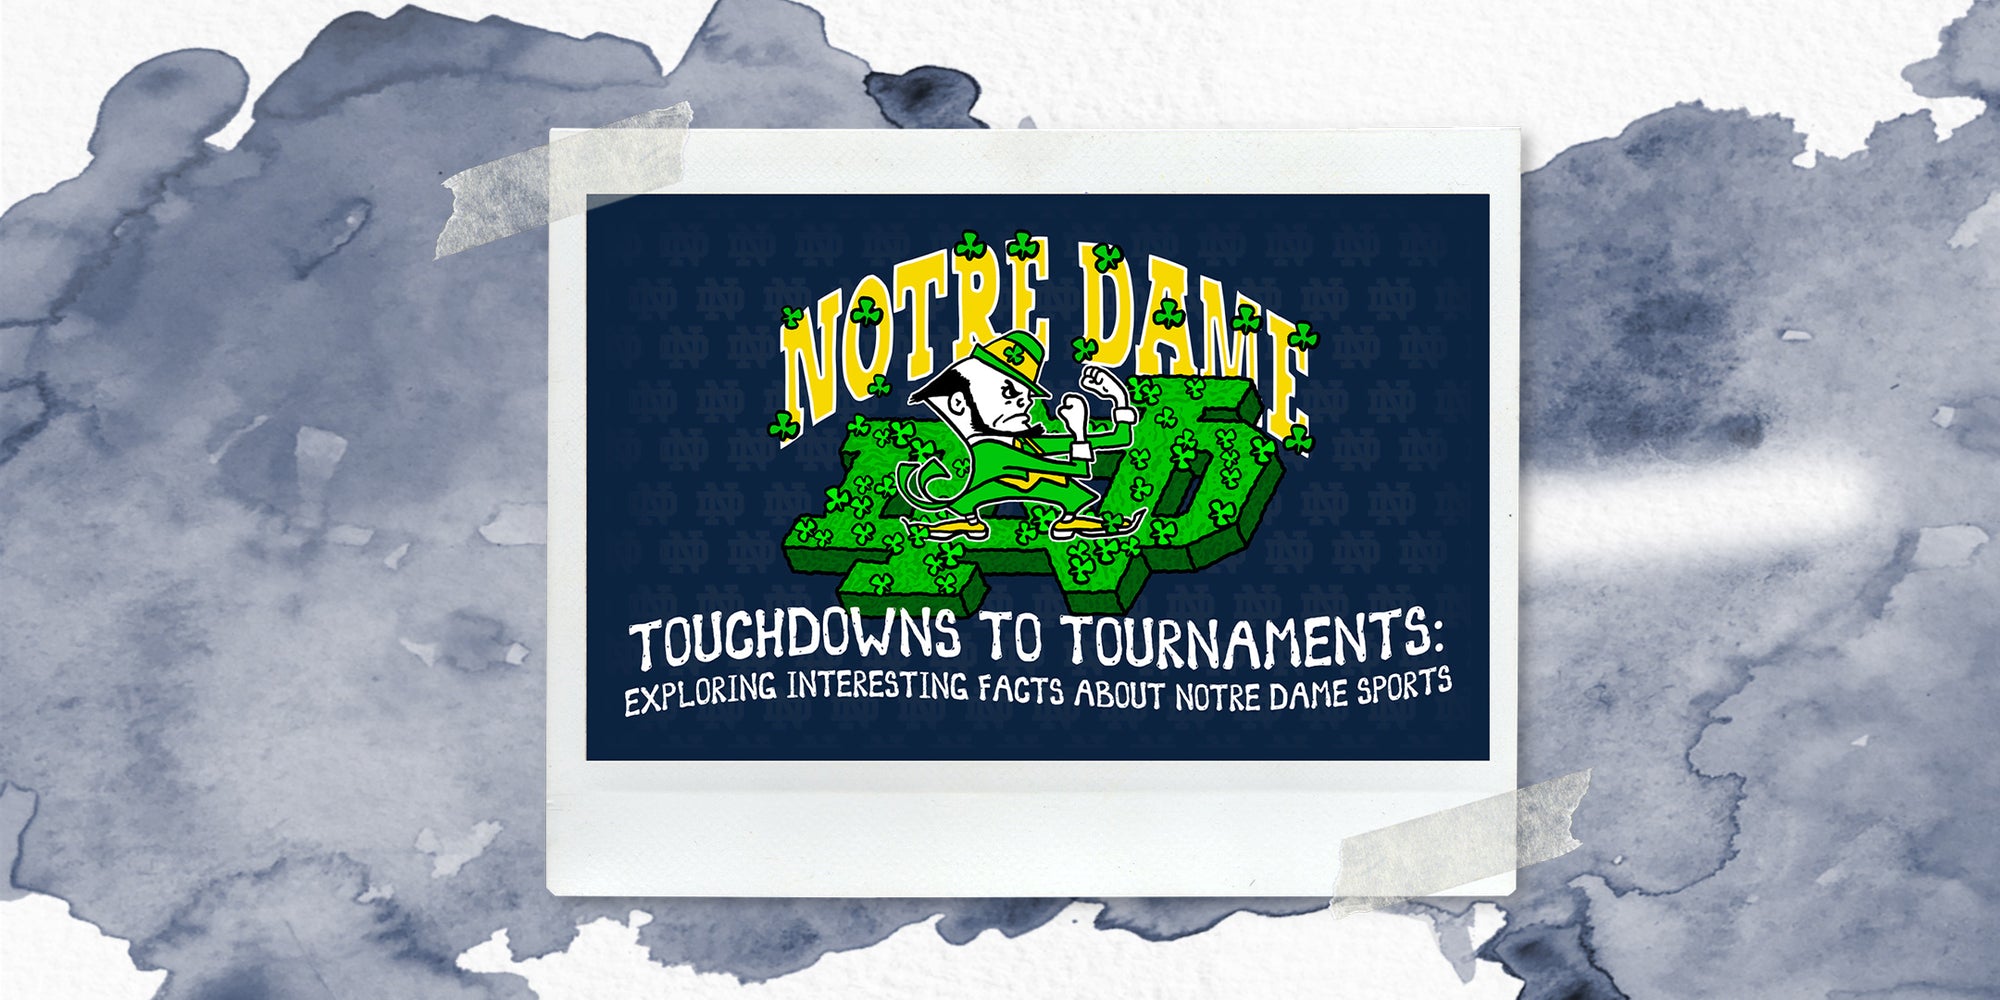 Touchdowns To Tournaments: Exploring Interesting Facts About Notre Dame Sports